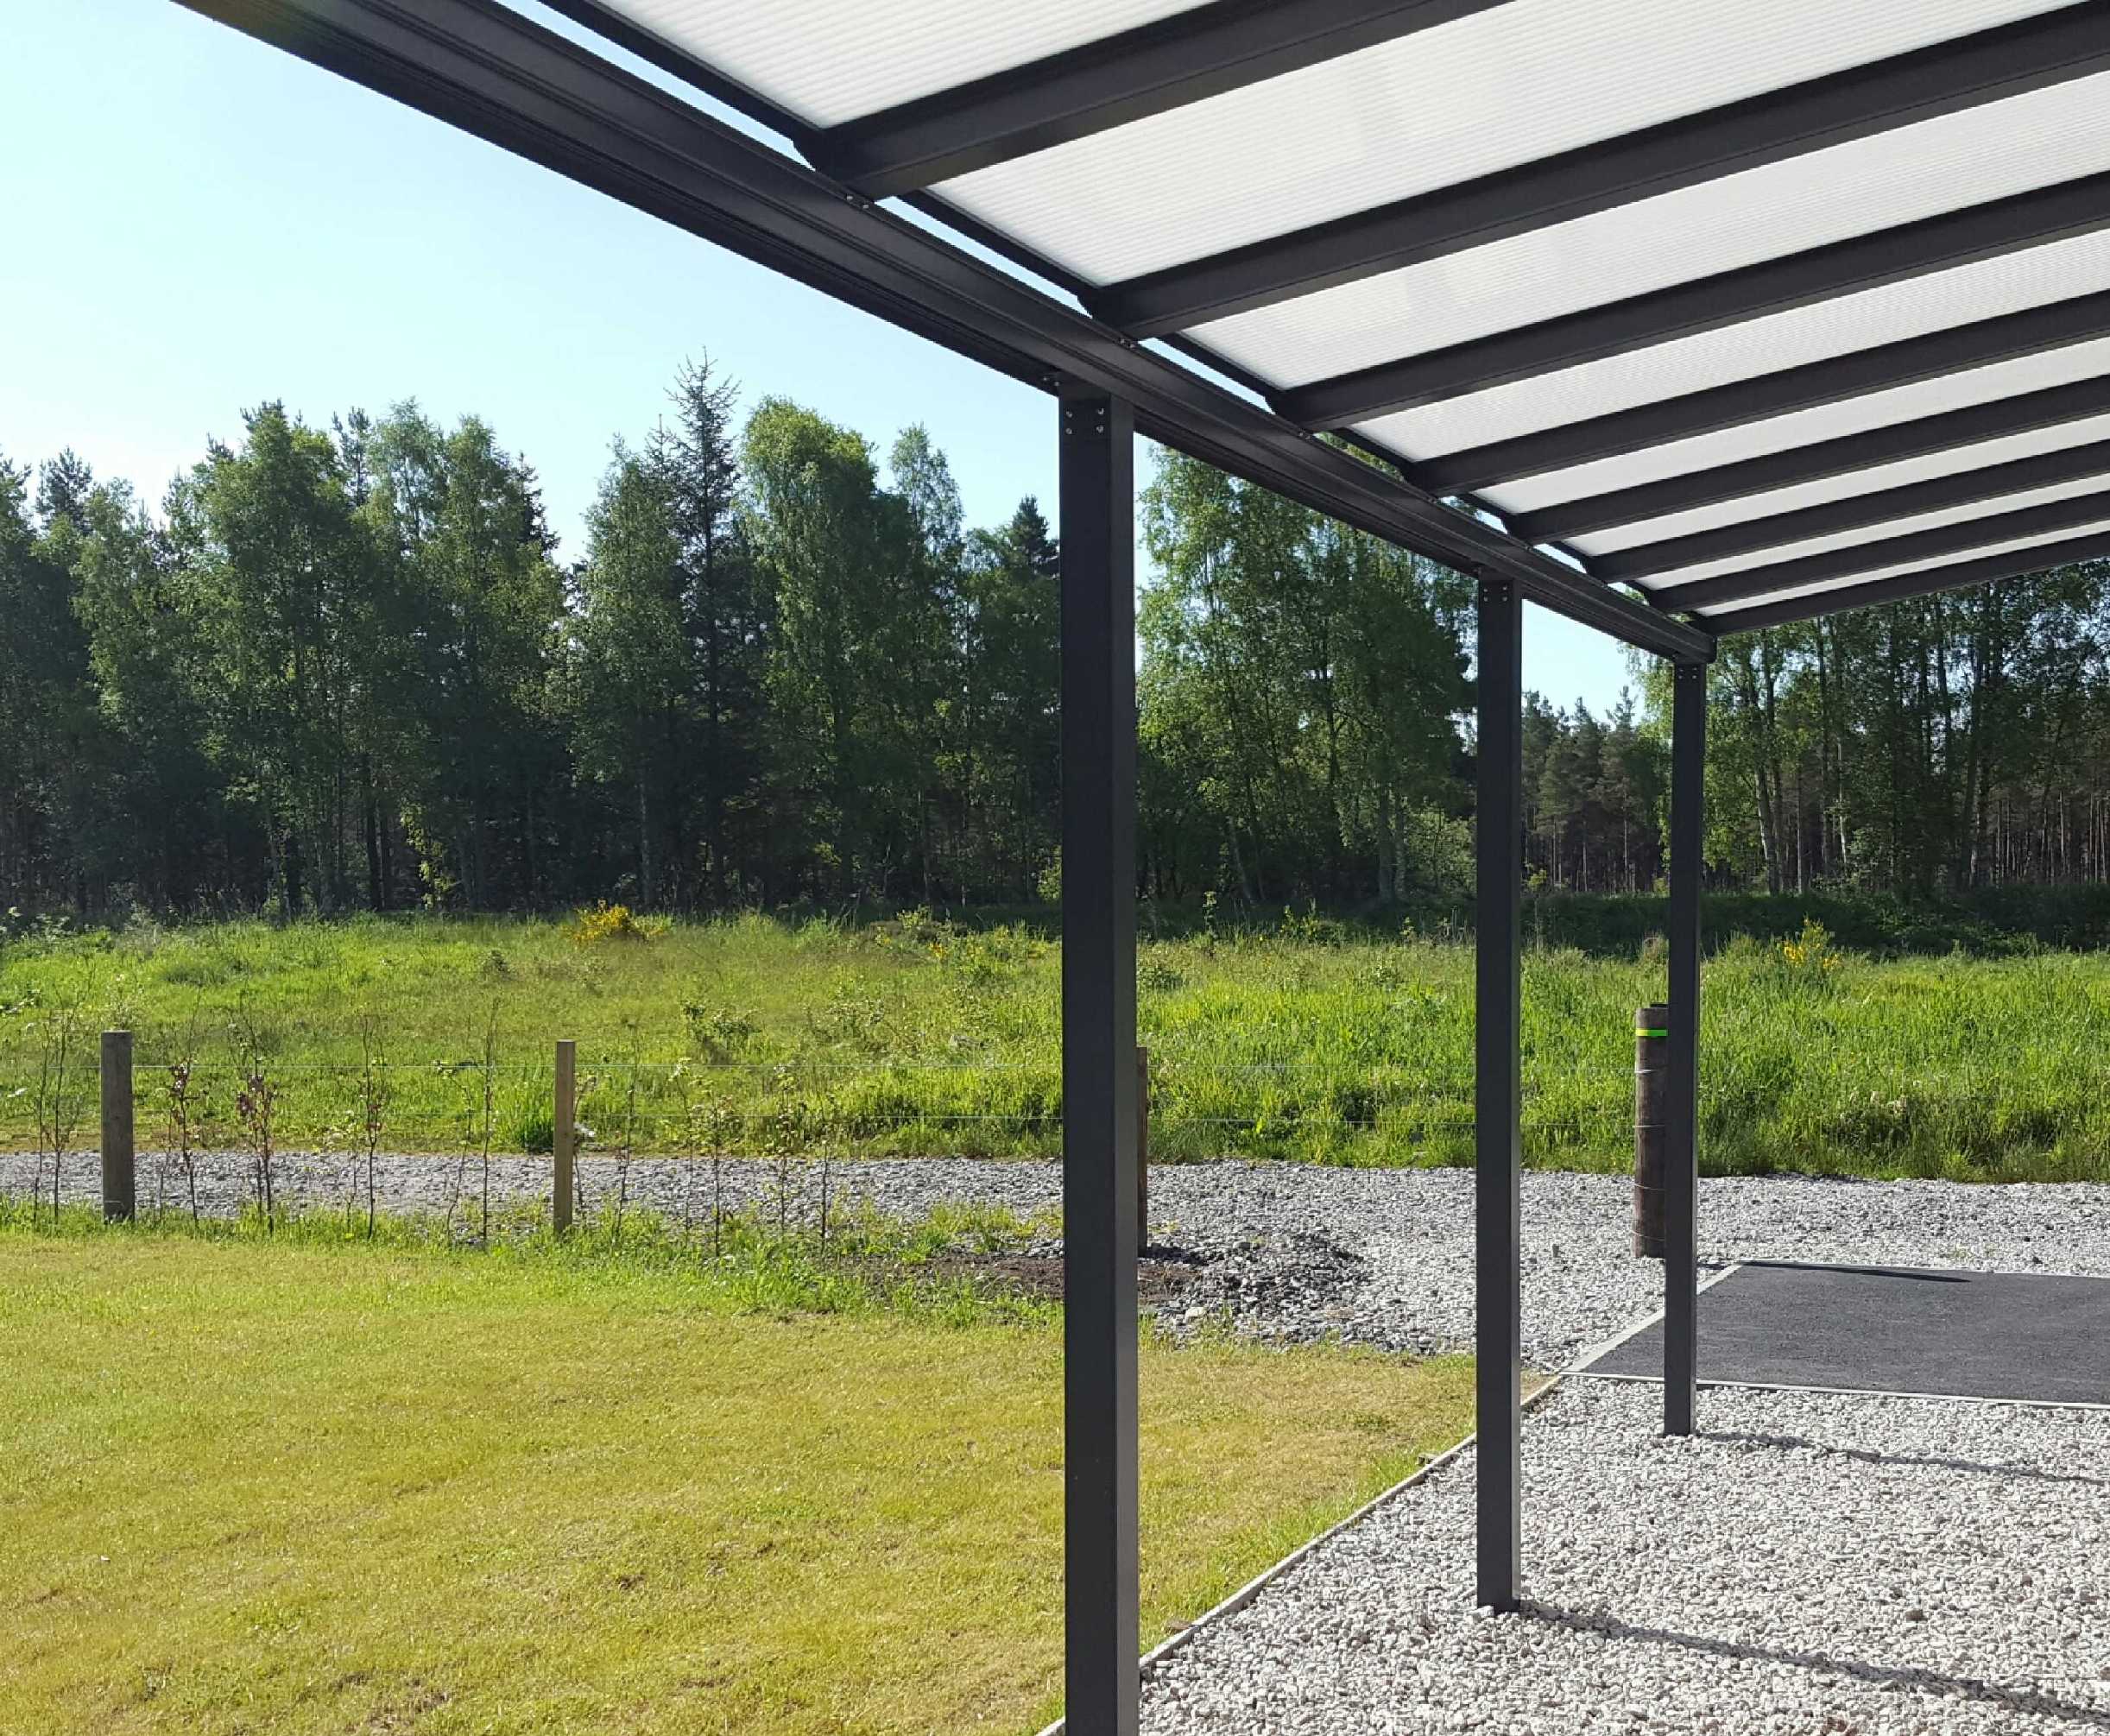 Omega Smart Lean-To Canopy, Anthracite Grey, 6mm Glass Clear Plate Polycarbonate Glazing - 5.6m (W) x 3.5m (P), (3) Supporting Posts